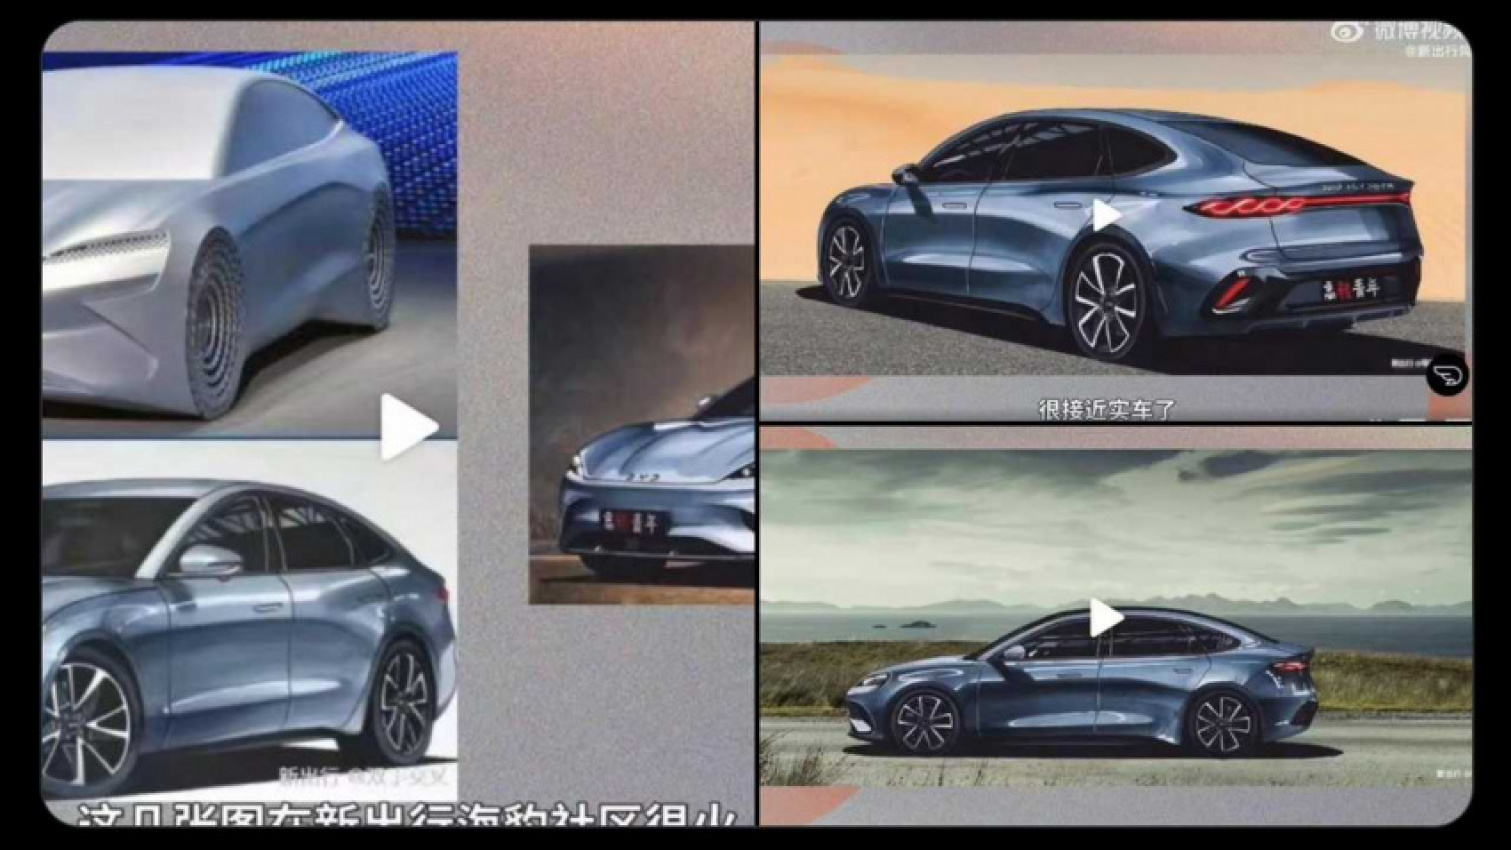 autos, byd, cars, evs, tesla, tesla model 3, report: upcoming byd seal might be a tesla model 3 competitor